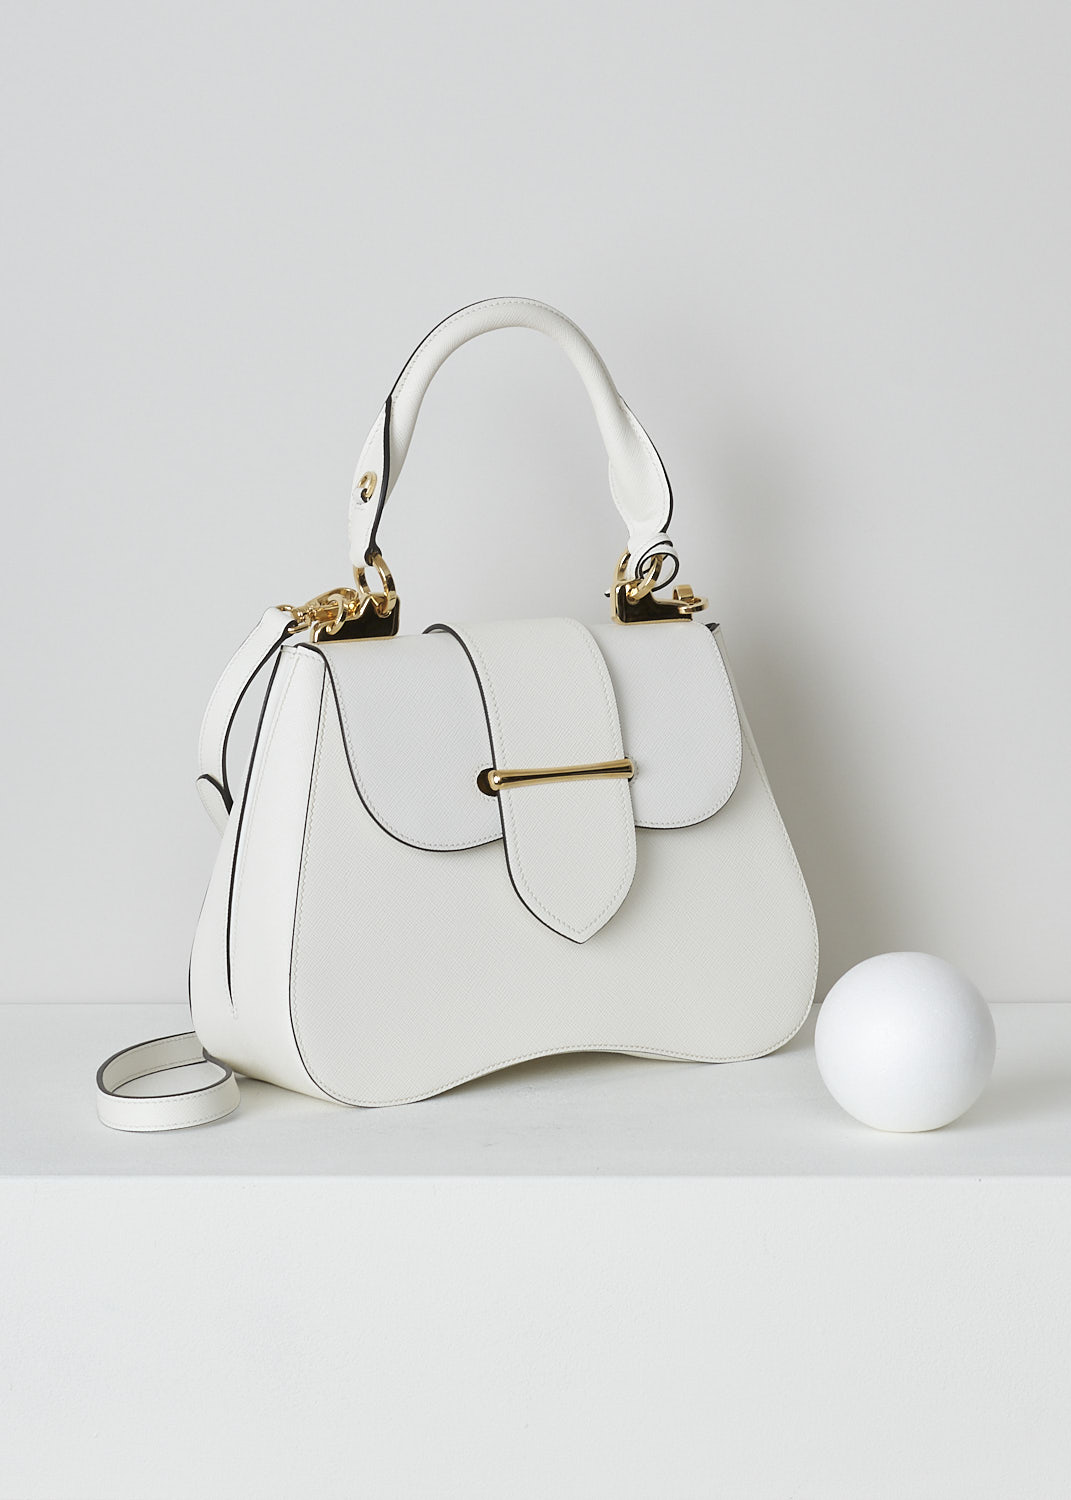 PRADA, MEDIUM SIDONIE TOP HANDLE BAG IN WHITE, CARTELLA_1BN005_F0009_BIANCO, White, Side, This mid-sized white Sidonie Top Handle Bag is made with Saffiano leather. The bag comes with a leather handle and an adjustable and detachable shoulder strap. The bag has gold-tone metal hardware with the brand's logo on the back. The removable leather keychain has that same gold-tone logo on it. The slip-through closure opens up to reveal its black interior. The bag has a single, spacious compartment with a zipped inner pocket to one side and a patch pocket on the other side.  
